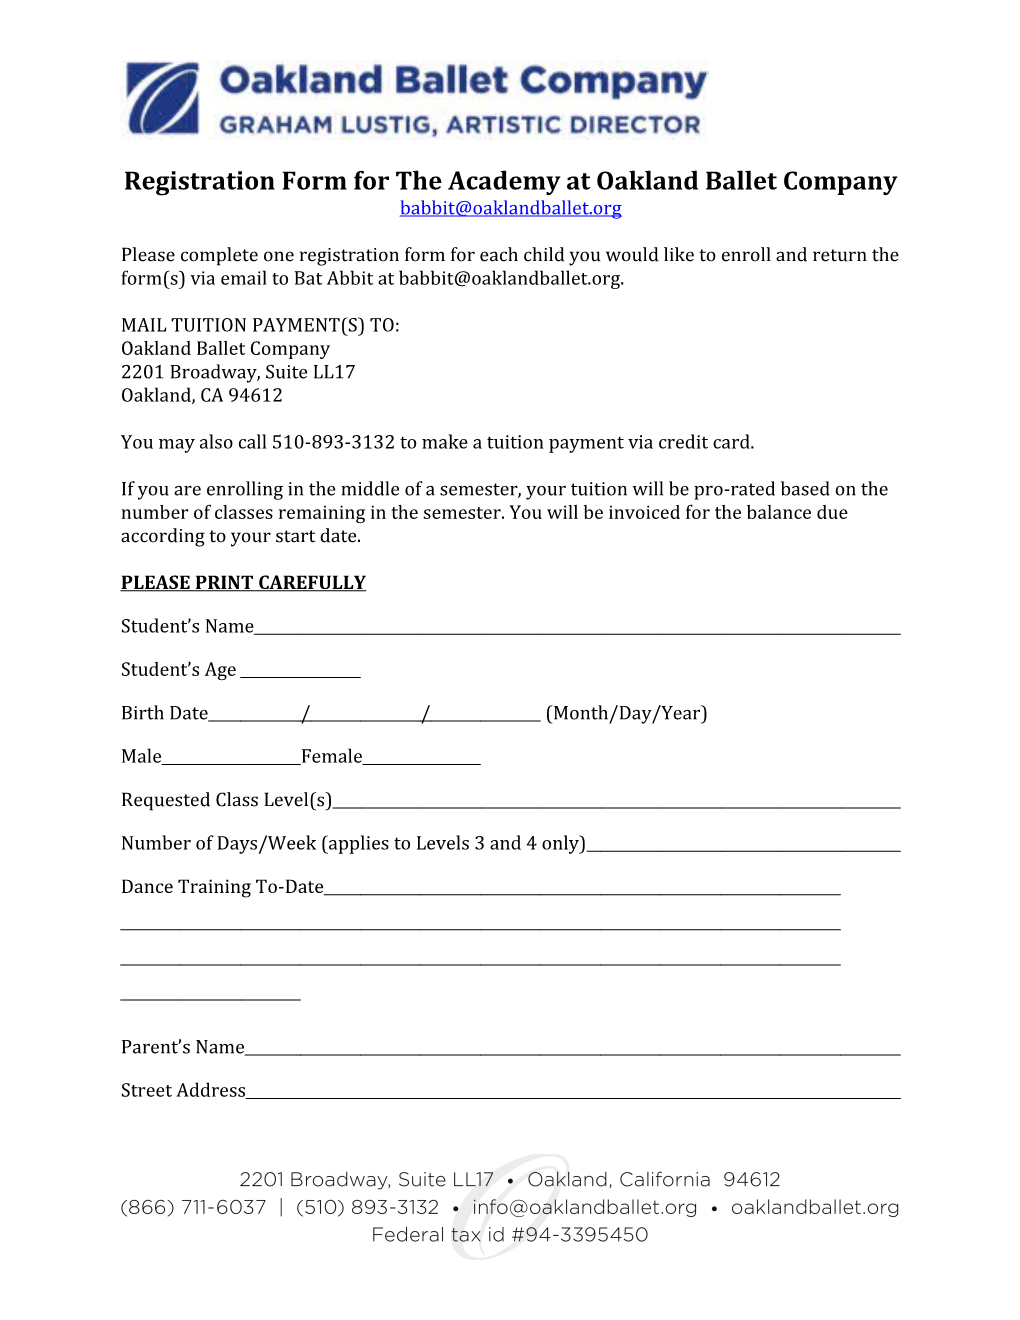 Registration Form for the Academy at Oakland Ballet Company